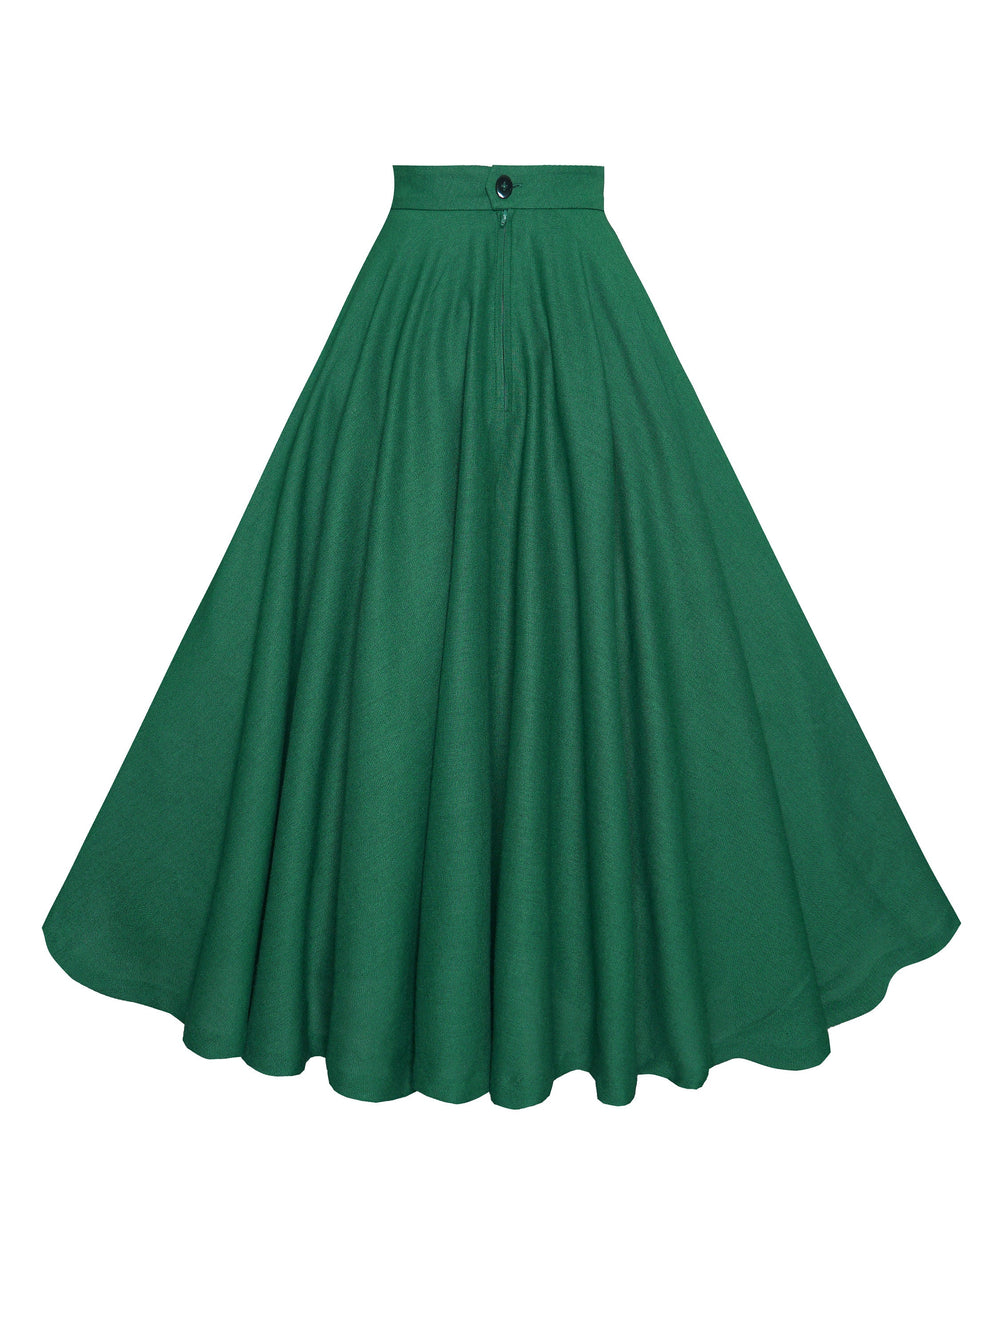 MTO - Lindy Skirt in Forest Green Linen